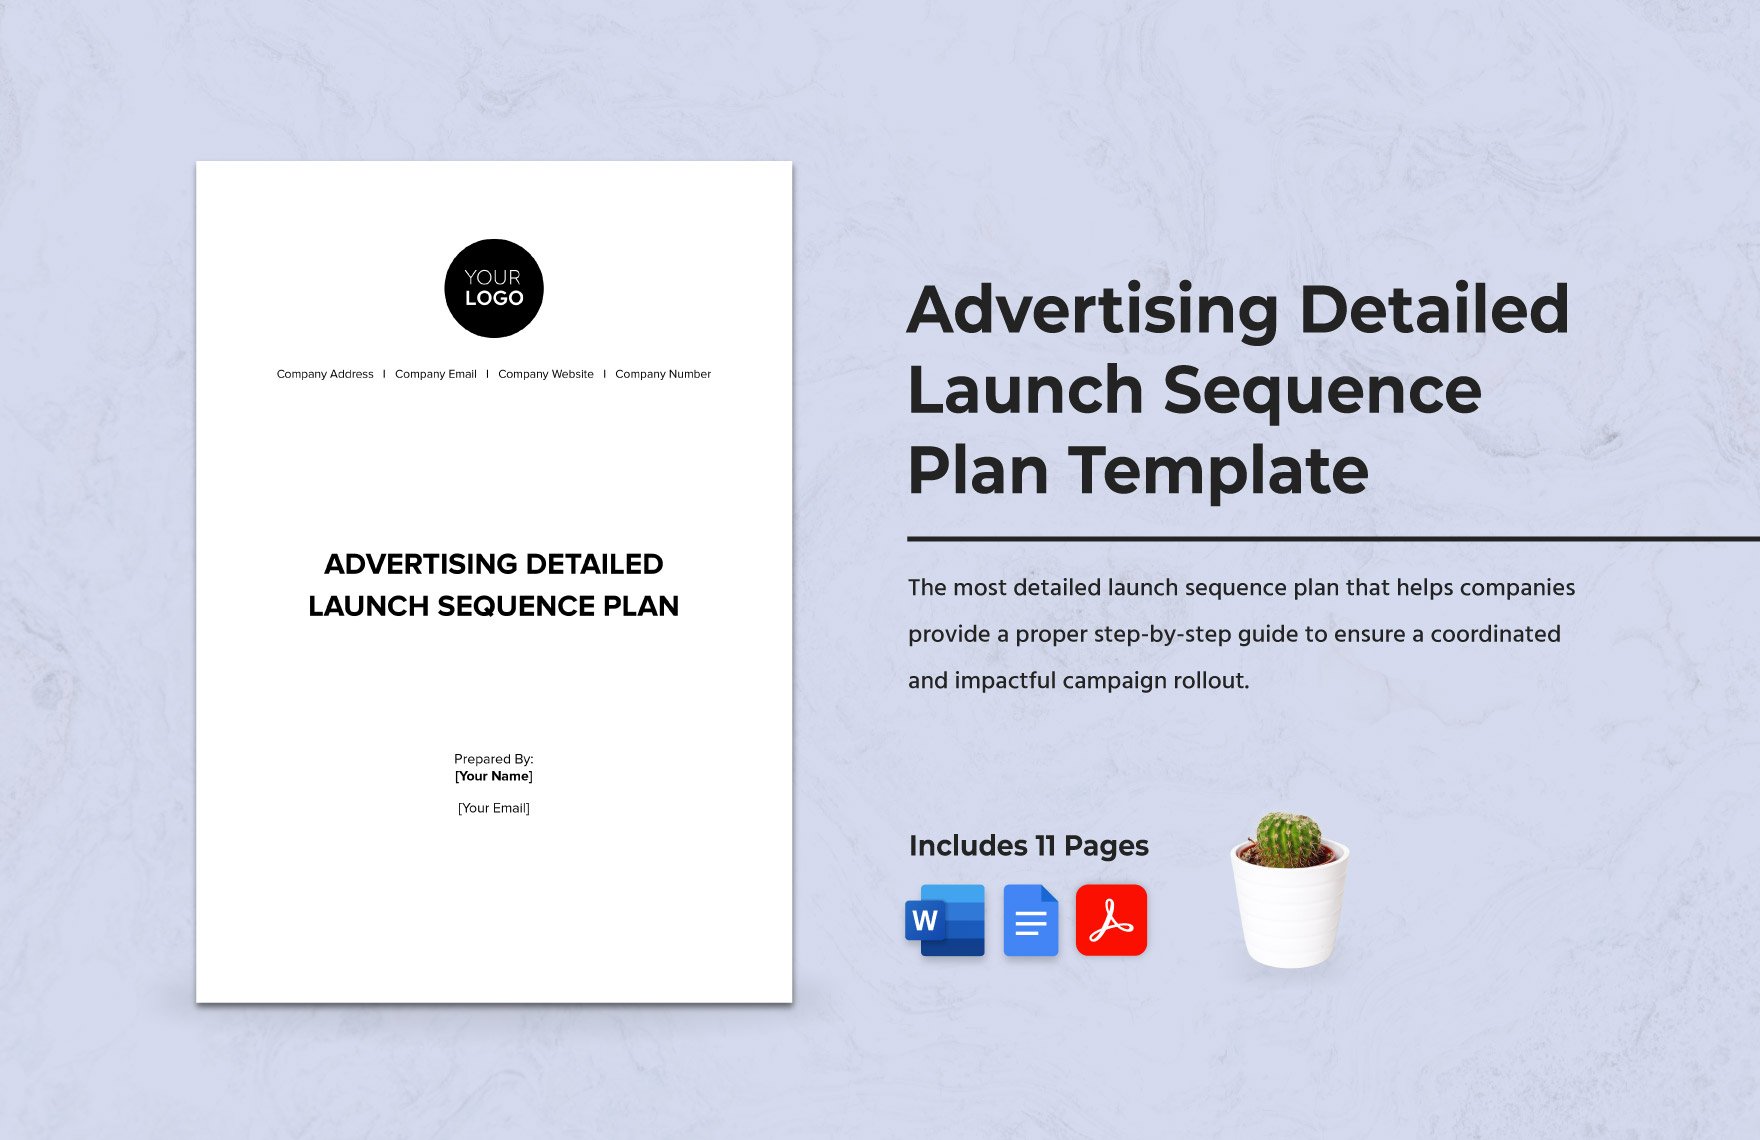 Advertising Detailed Launch Sequence Plan Template in Word, Google Docs, PDF